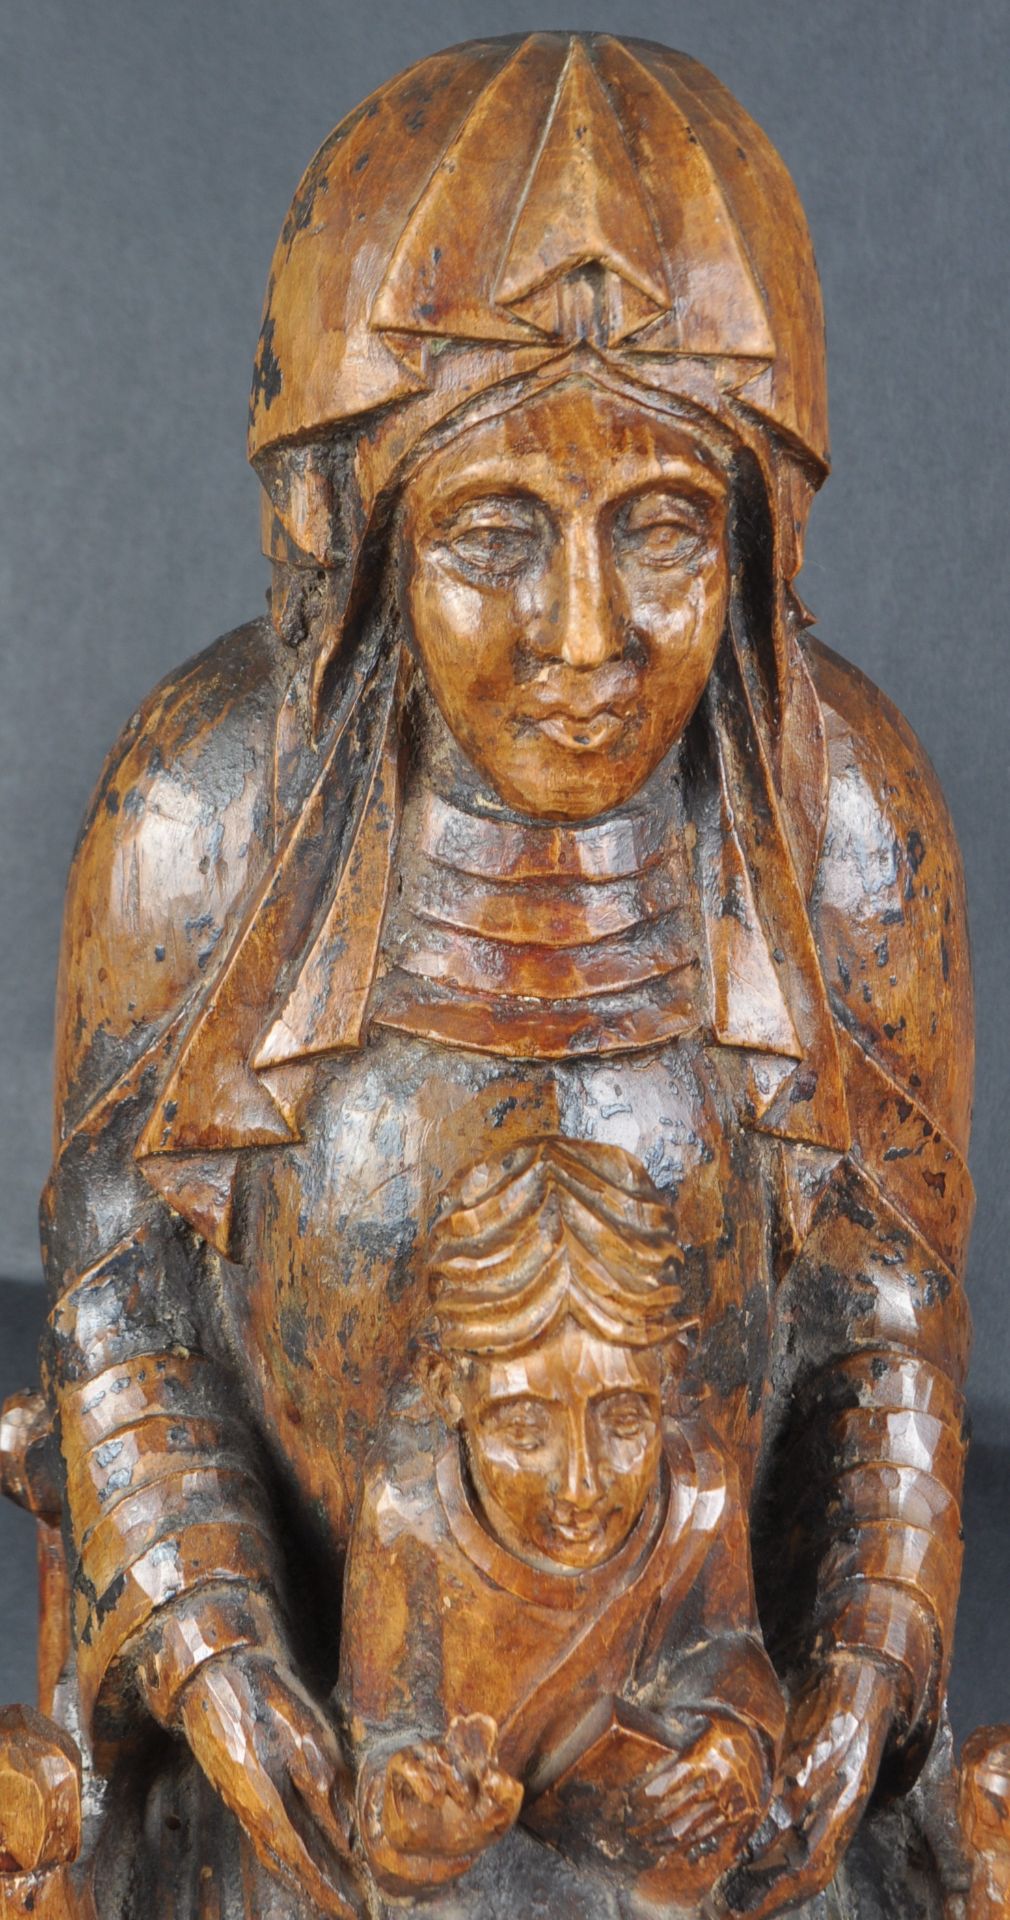 18TH CENTURY CARVED WALNUT RELIGIOUS ENTHRONED FIGURE - Image 3 of 6